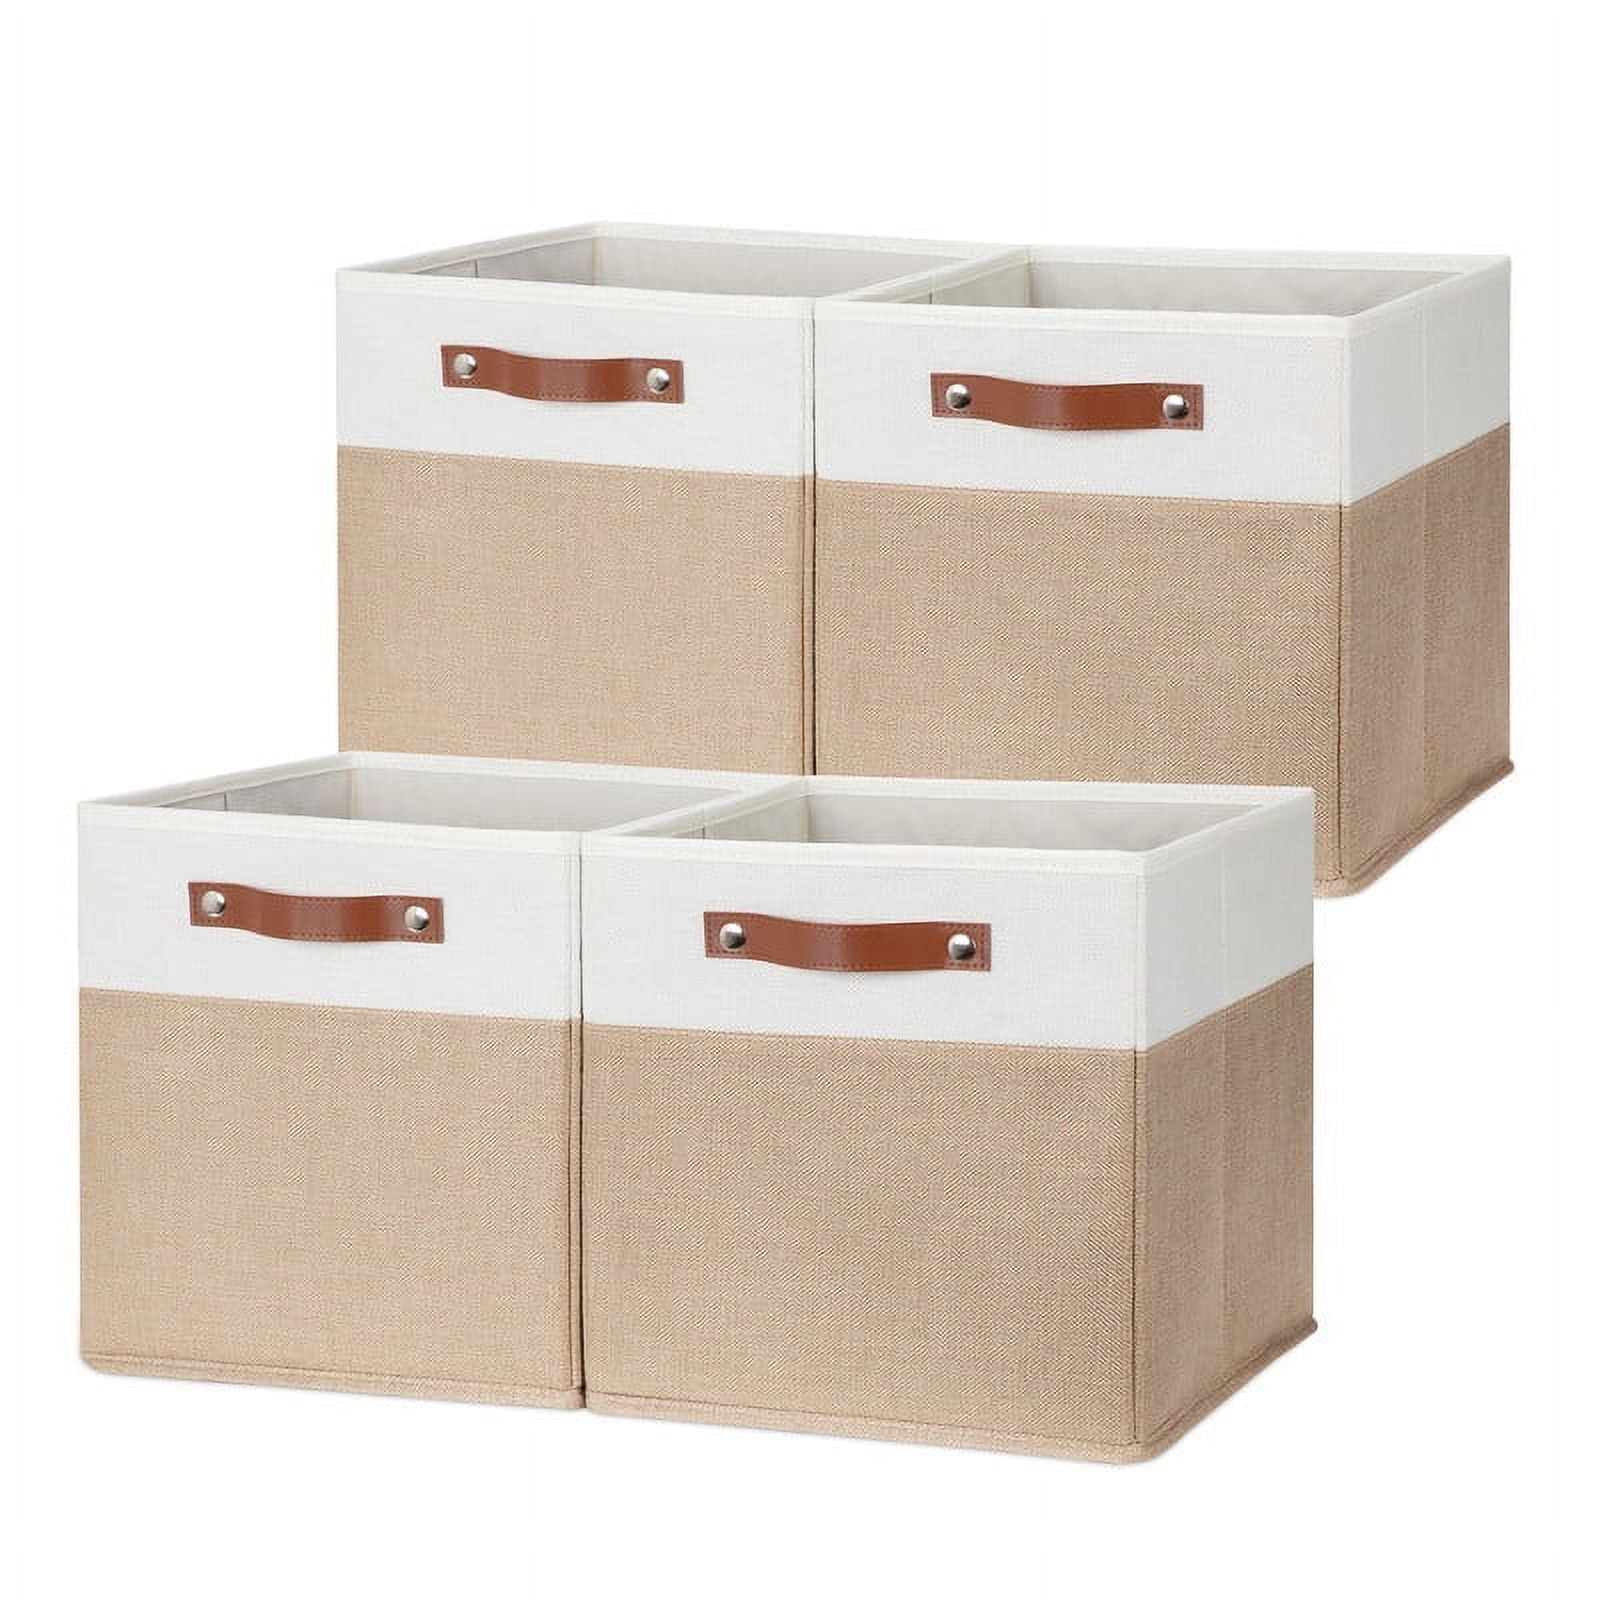 DULLEMELO Cube Storage Bins,12 x 12 x 12 inch Fabric Storage Cubes for ...